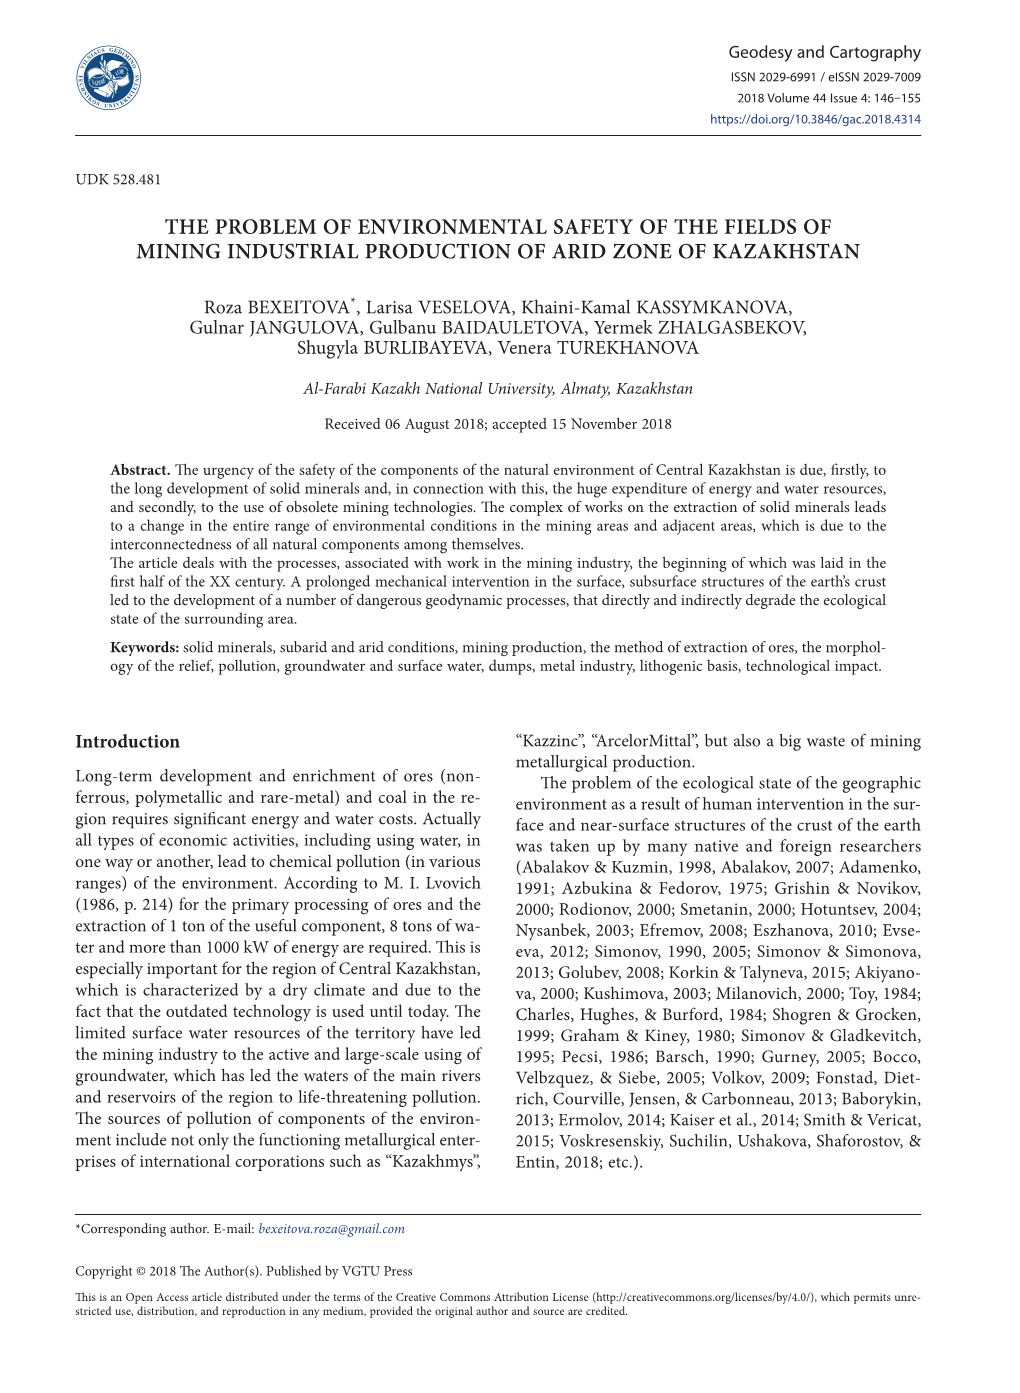 The Problem of Environmental Safety of the Fields of Mining Industrial Production of Arid Zone of Kazakhstan